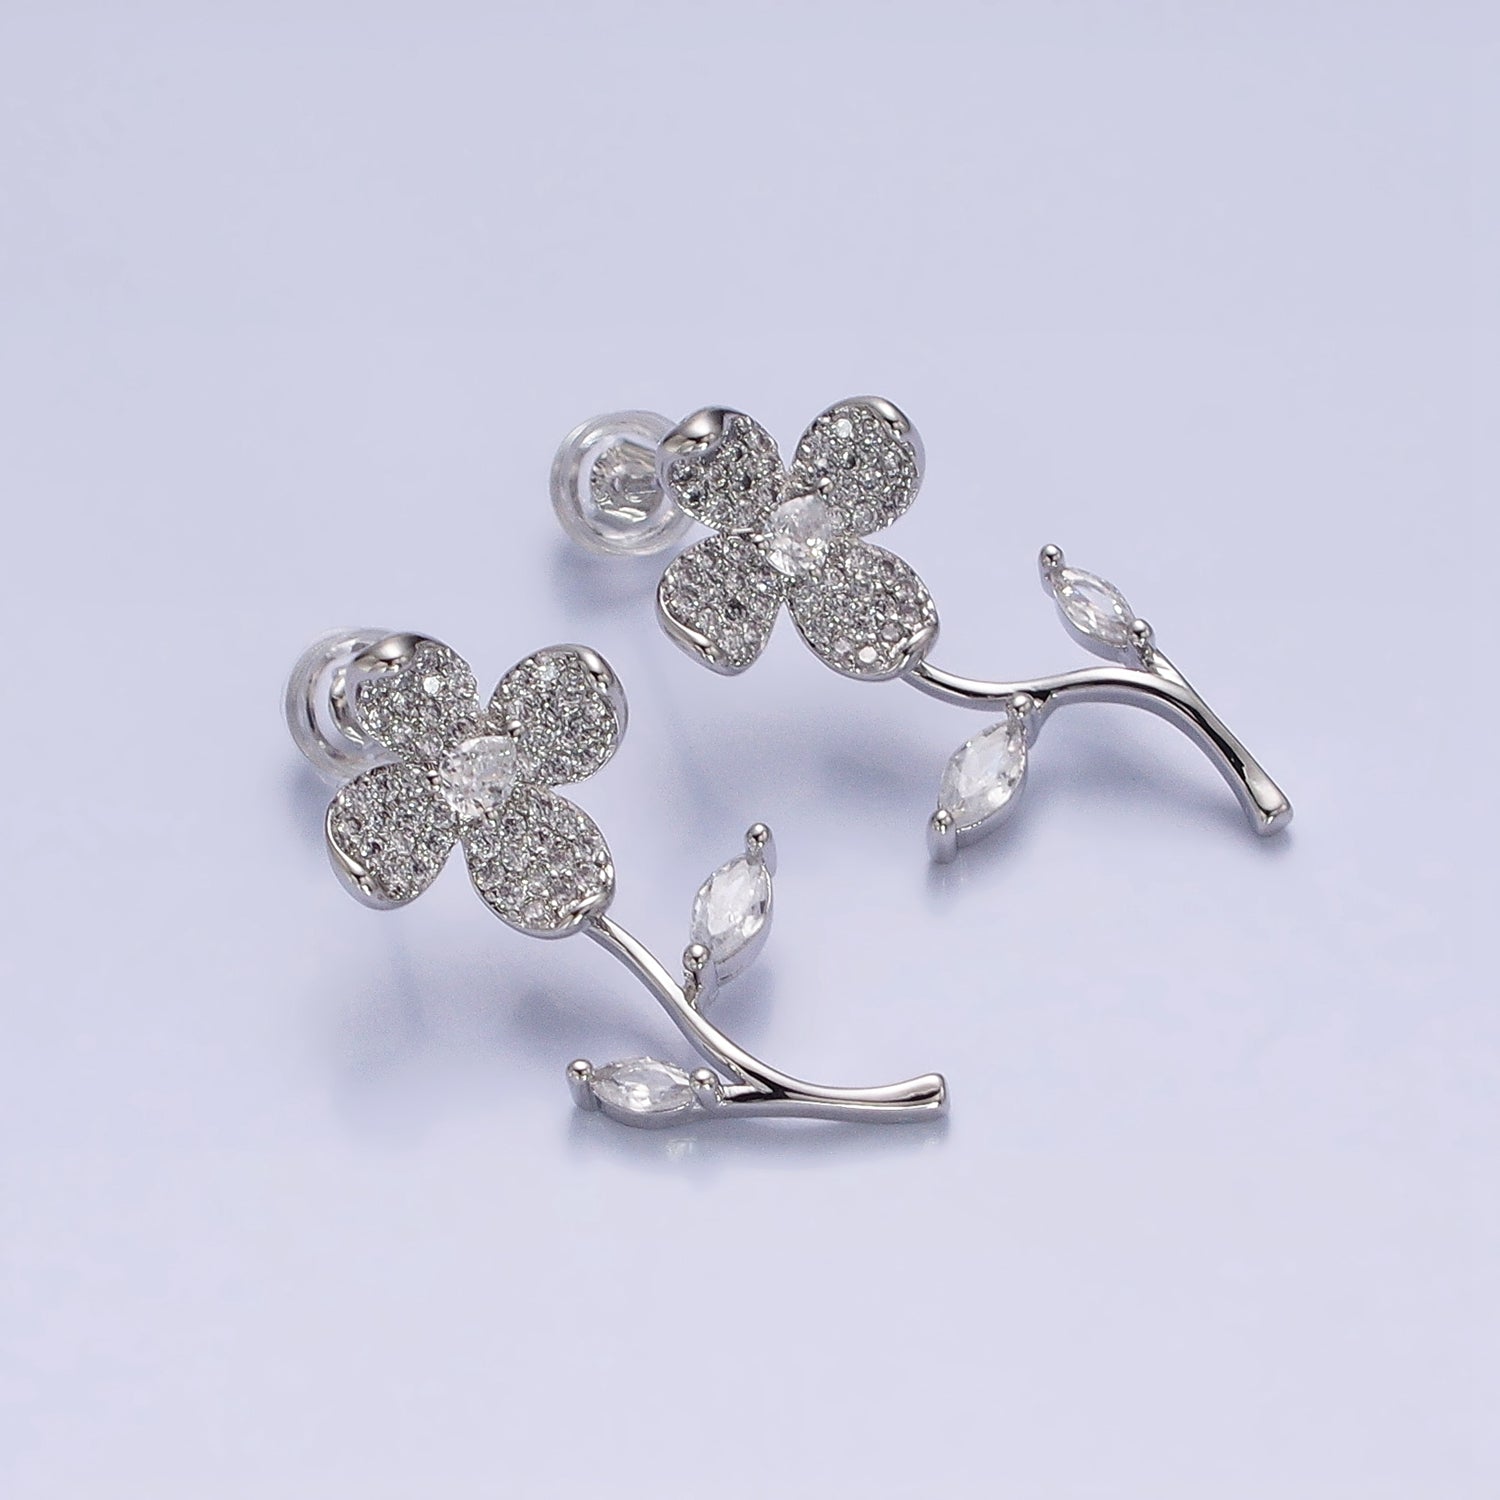 Silver, Gold Blooming Flower Marquise Leaf Micro Paved CZ Stud Earrings | AB812 AB832